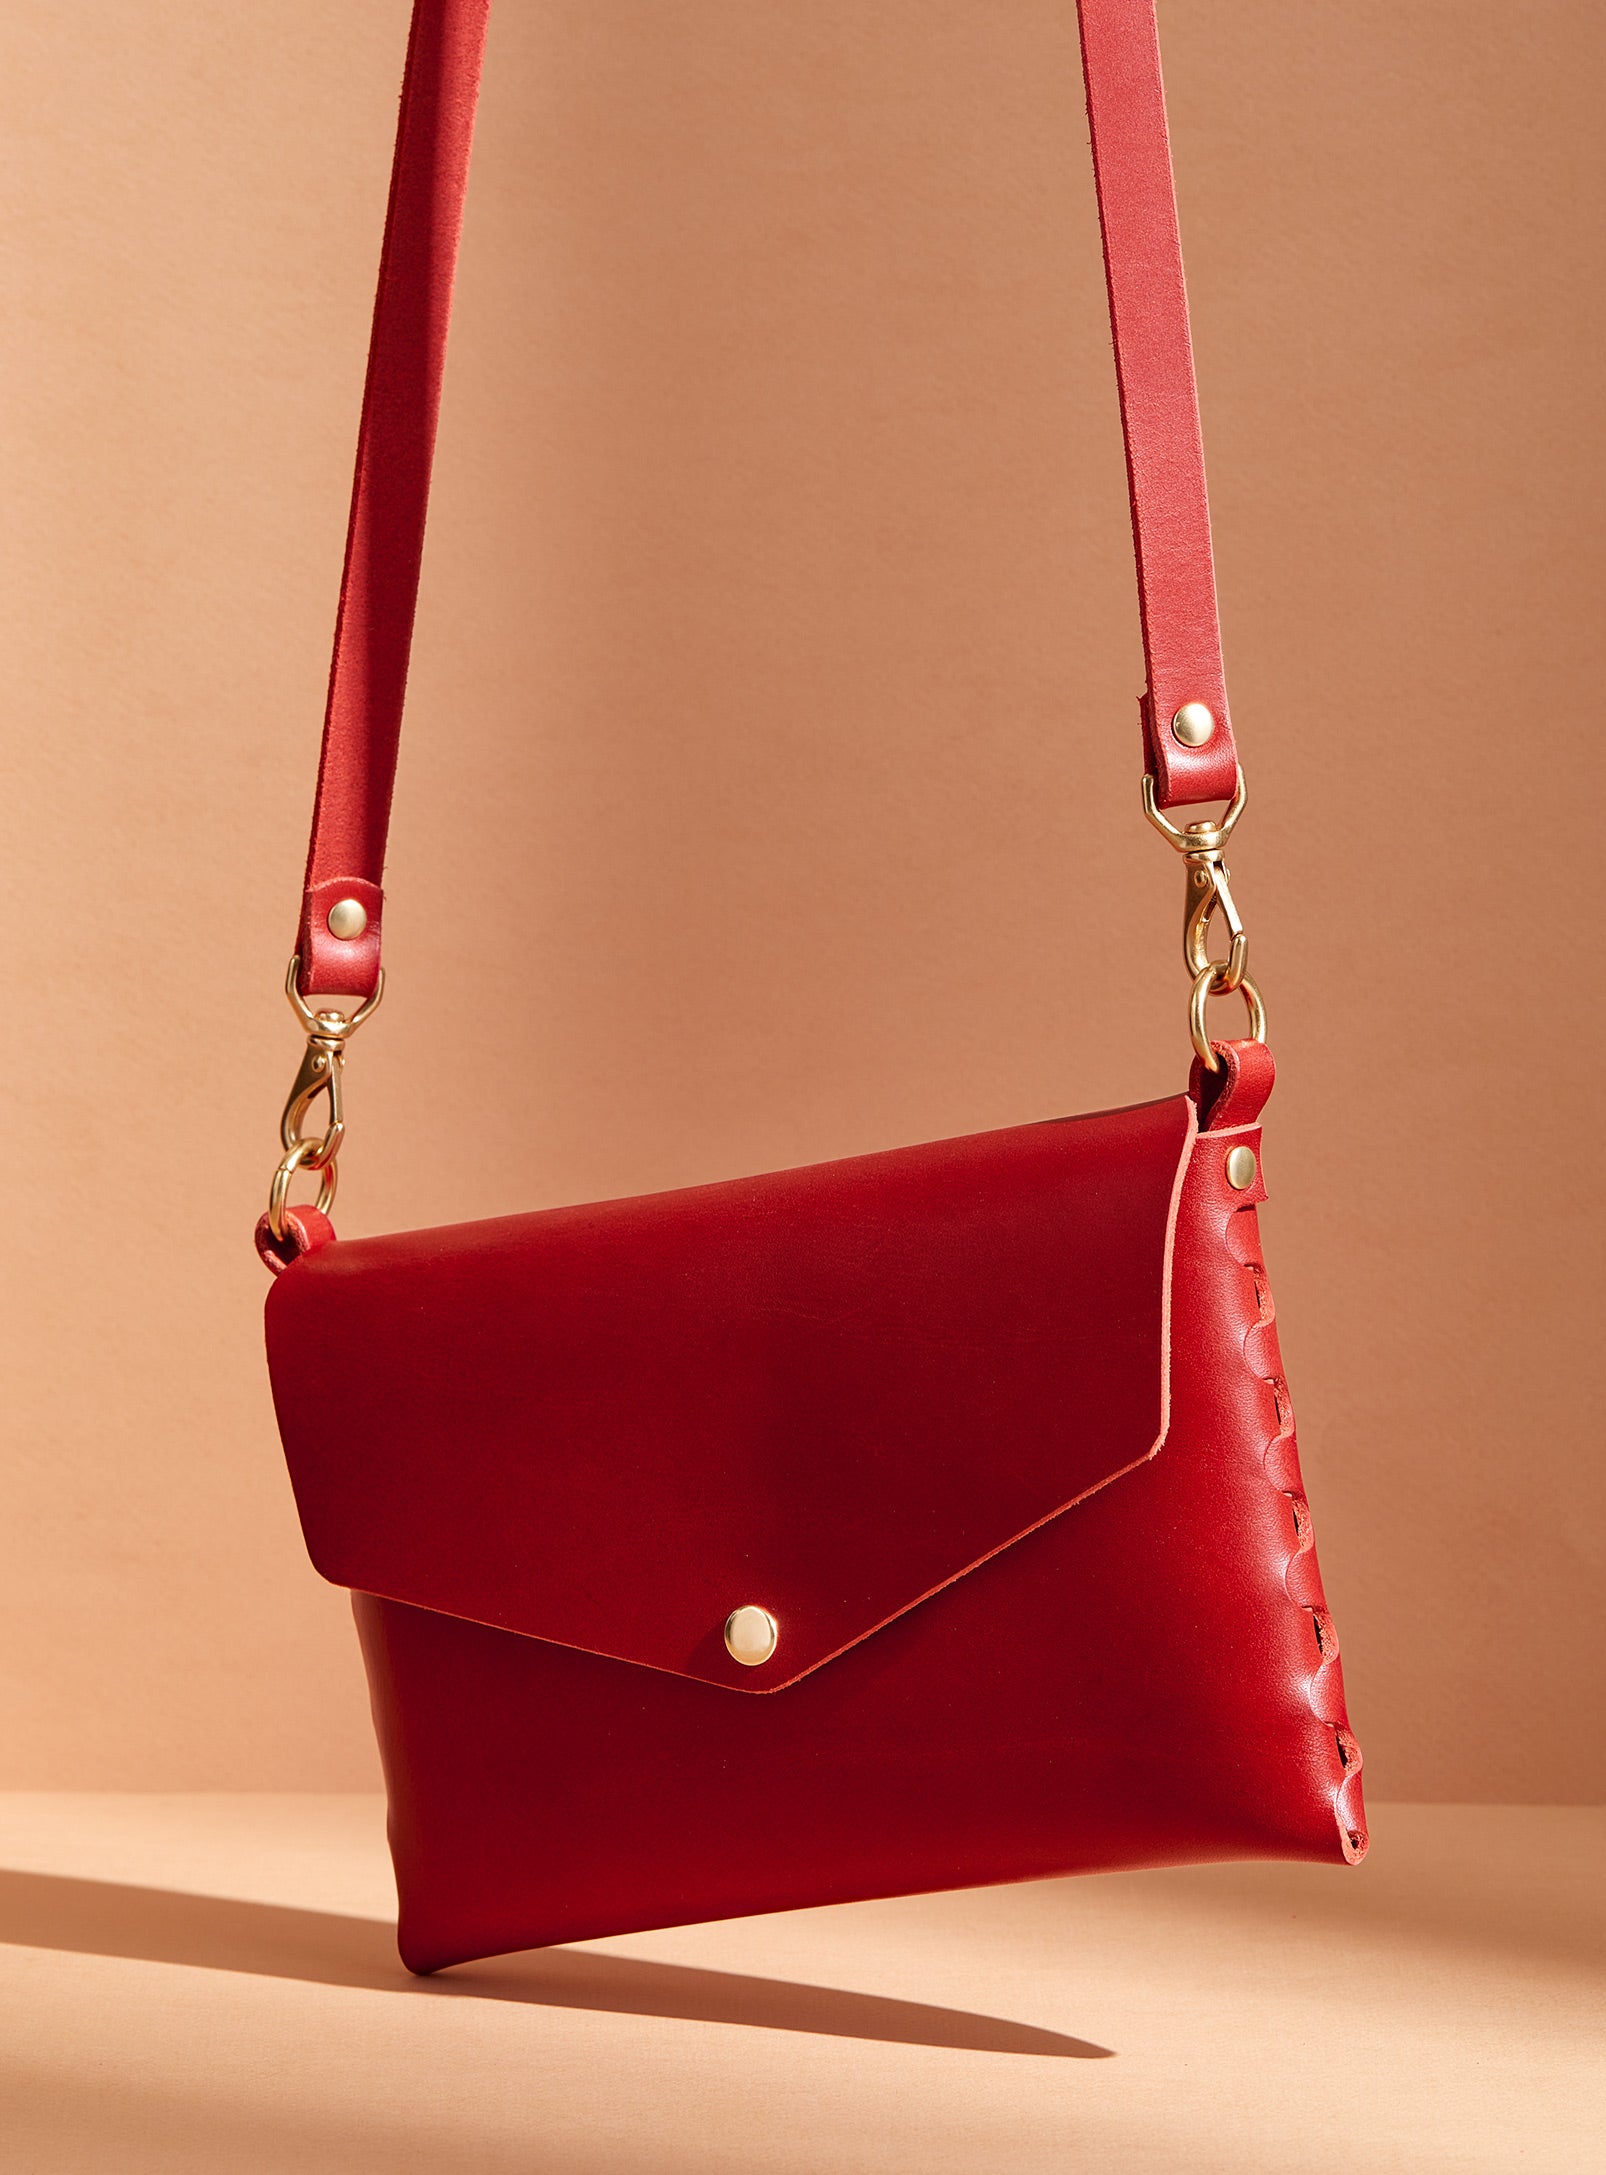 The modjūl mini bag in red. A classic leather bag handmade in Canada using quality leather and brass hardware.